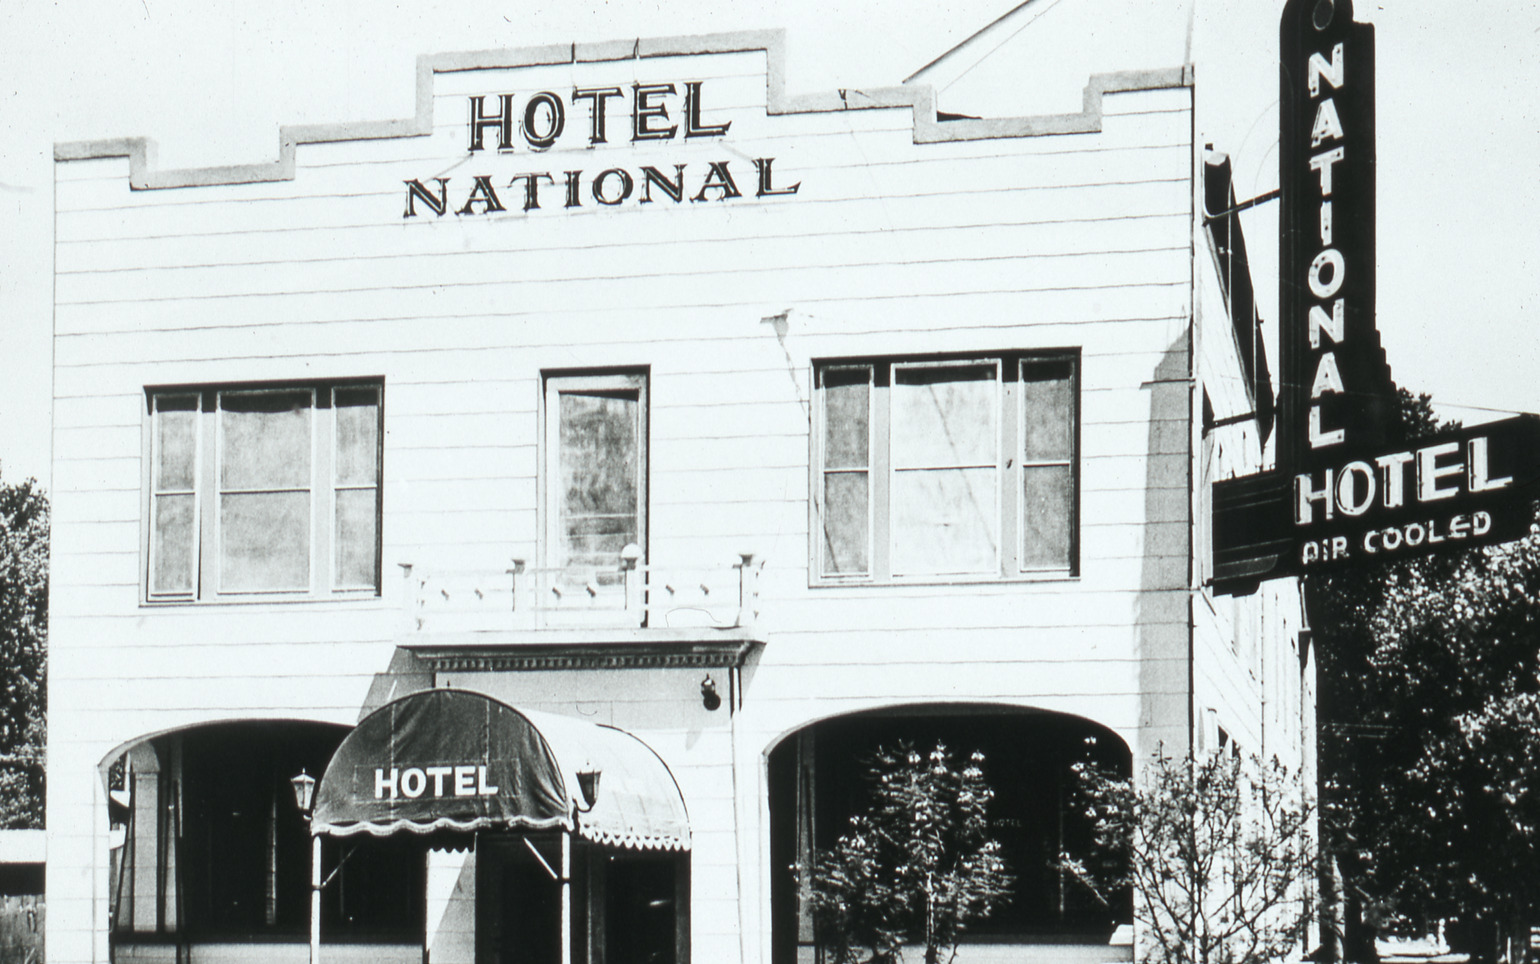 Hotel National flag mounted wall sign and lettering, Las Vegas, Nevada: photographic print